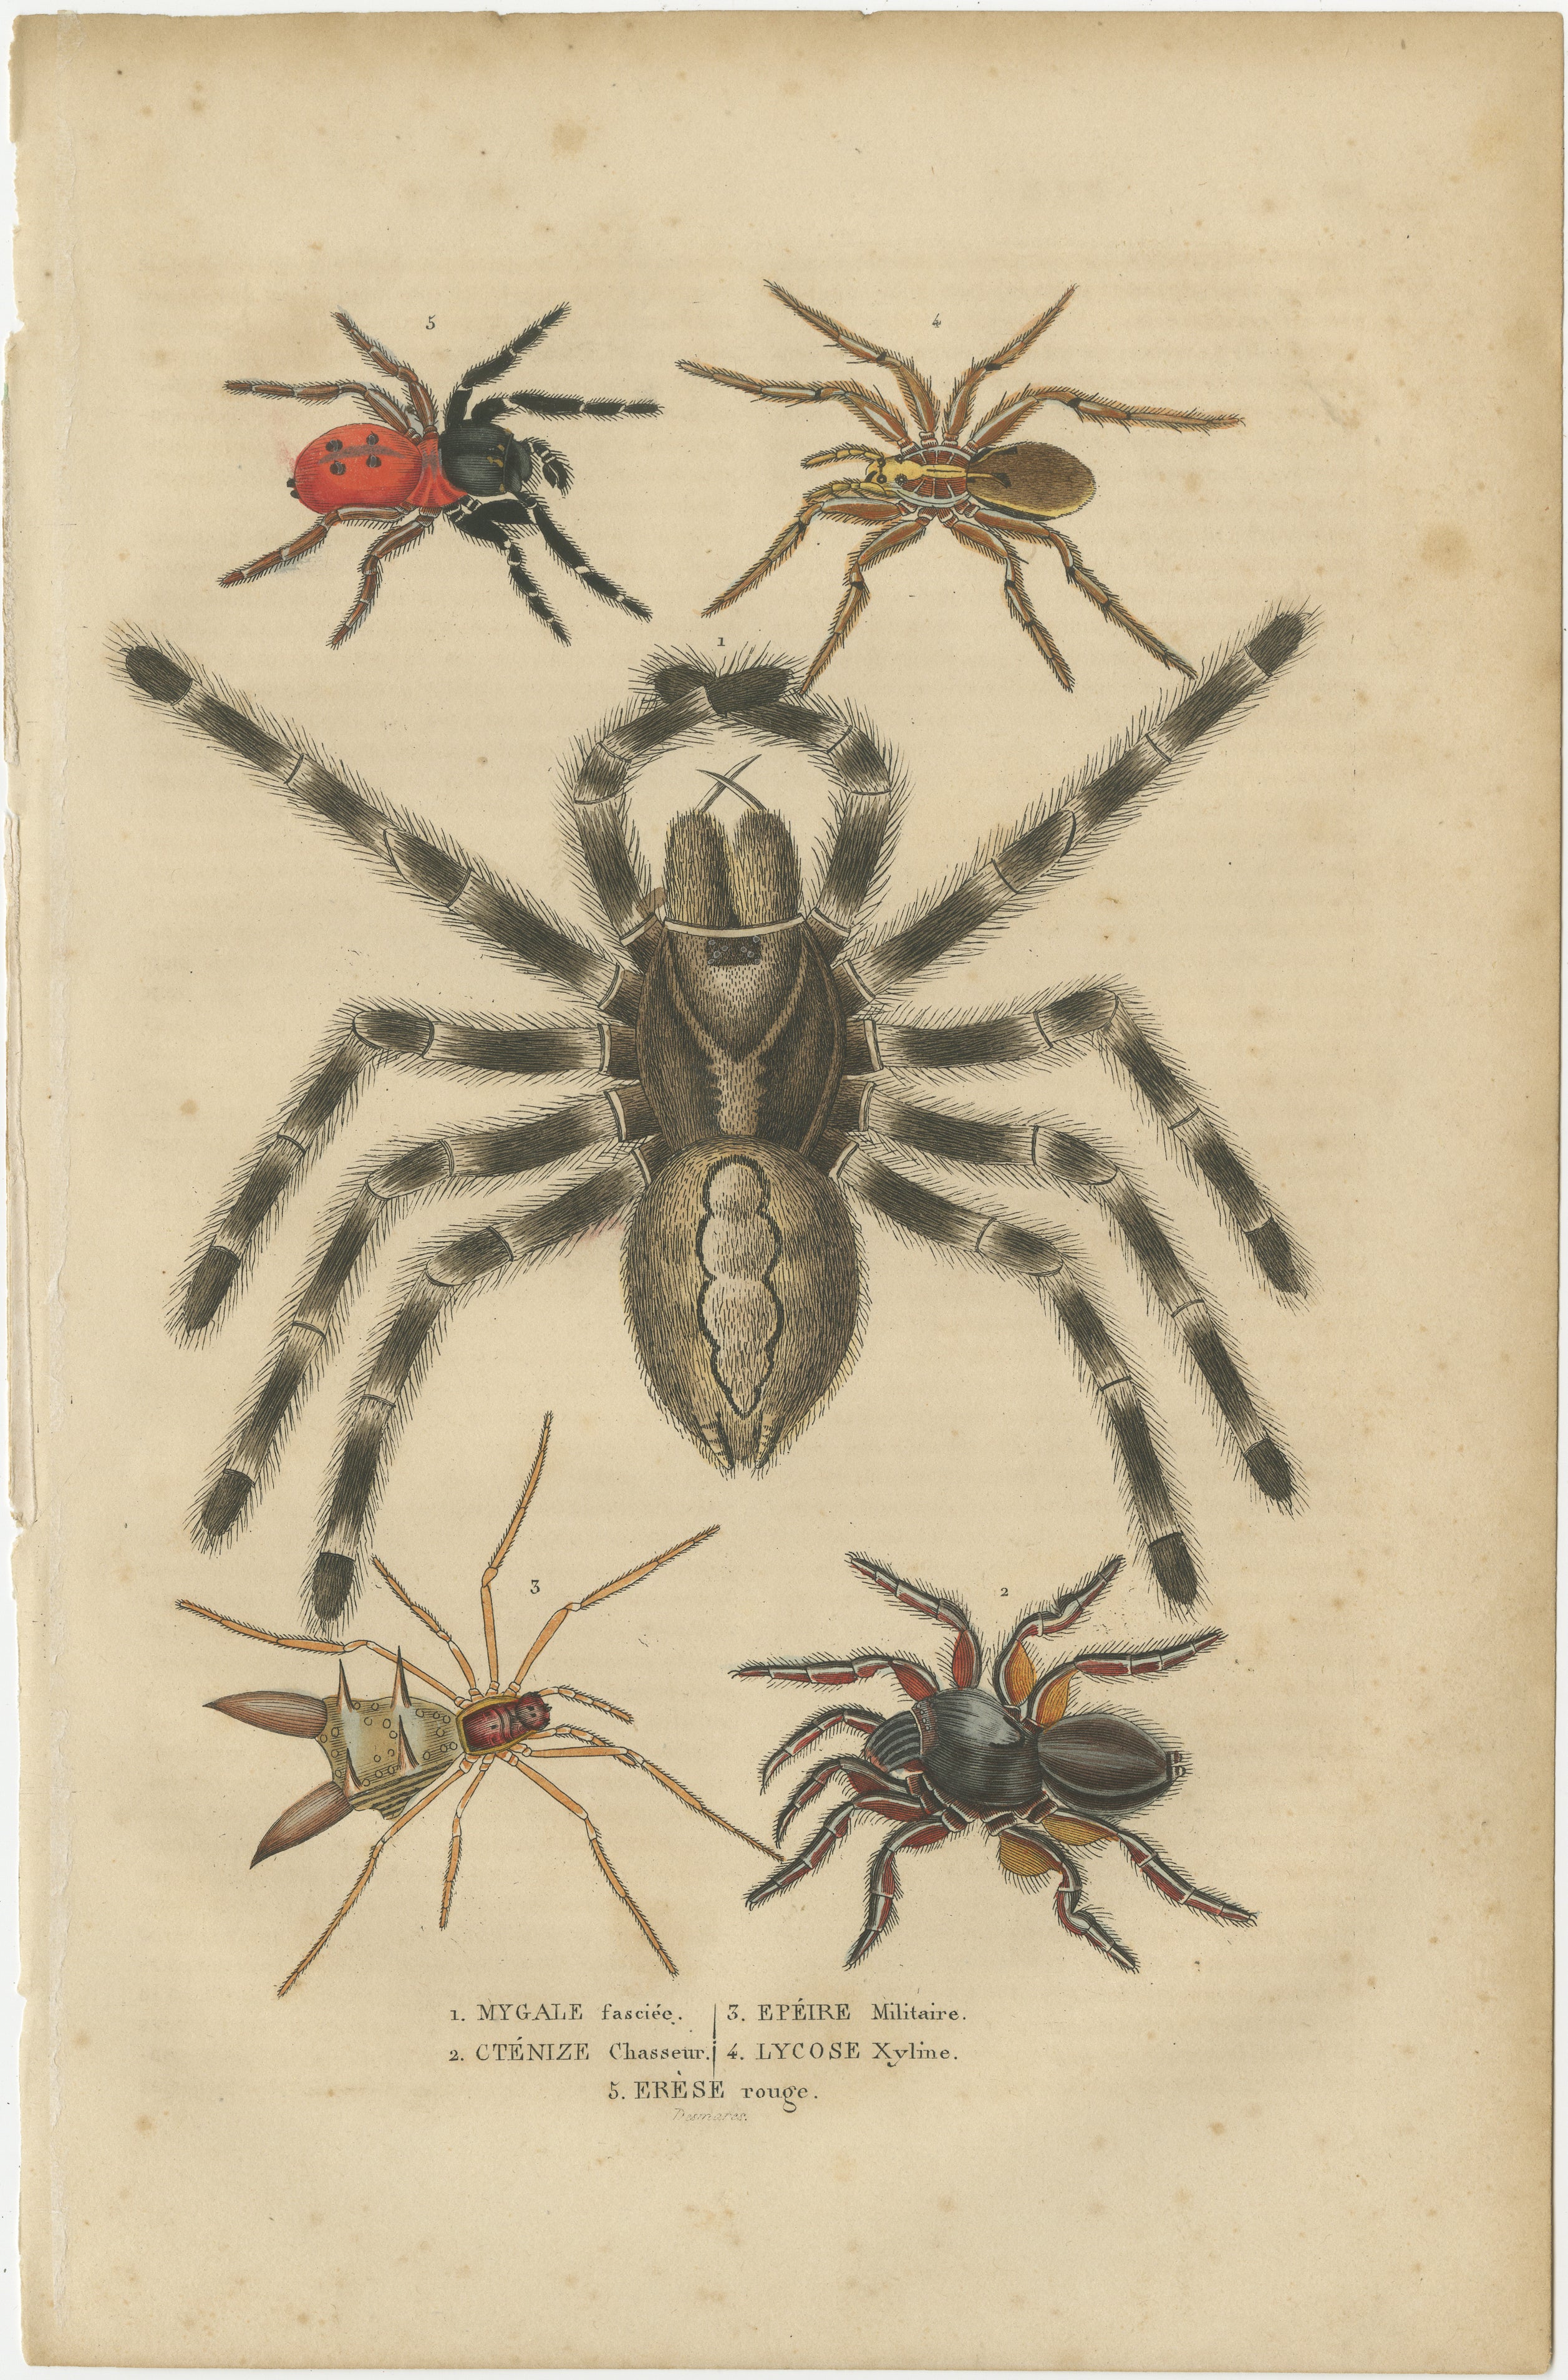 This exquisite 1845 handcolored engraving is a testament to the scientific curiosity and artistic detail of the 19th century. The print features a collection of five arachnids, each meticulously rendered to showcase their unique anatomical features.